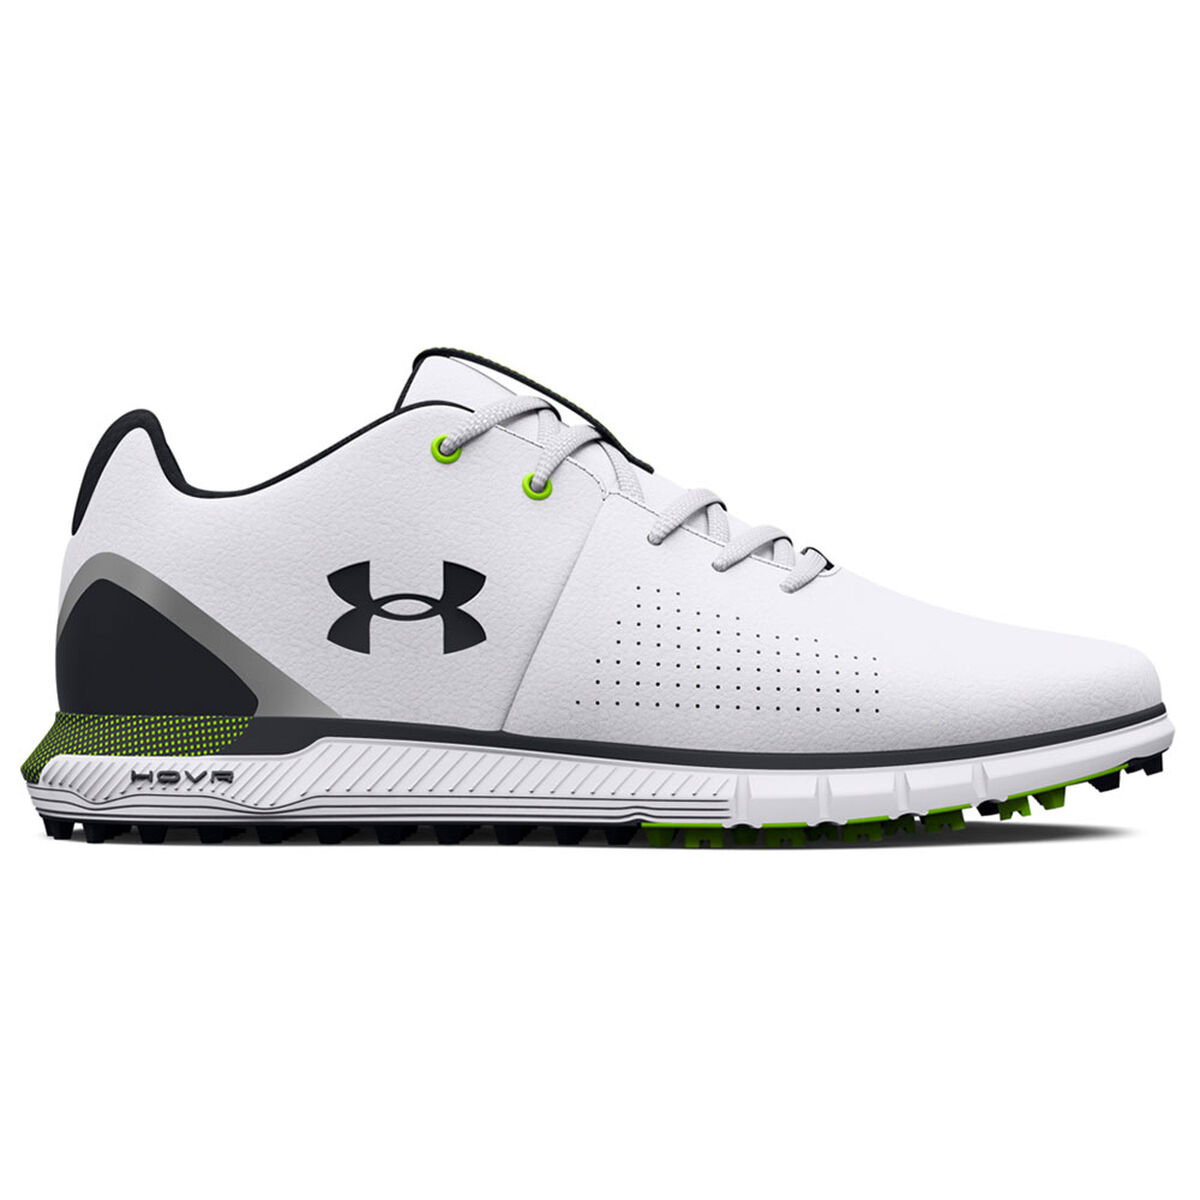 Under Armour Men’s HOVR Fade 2 Spikeless Golf Shoes, Mens, White/black/black, 9 | American Golf